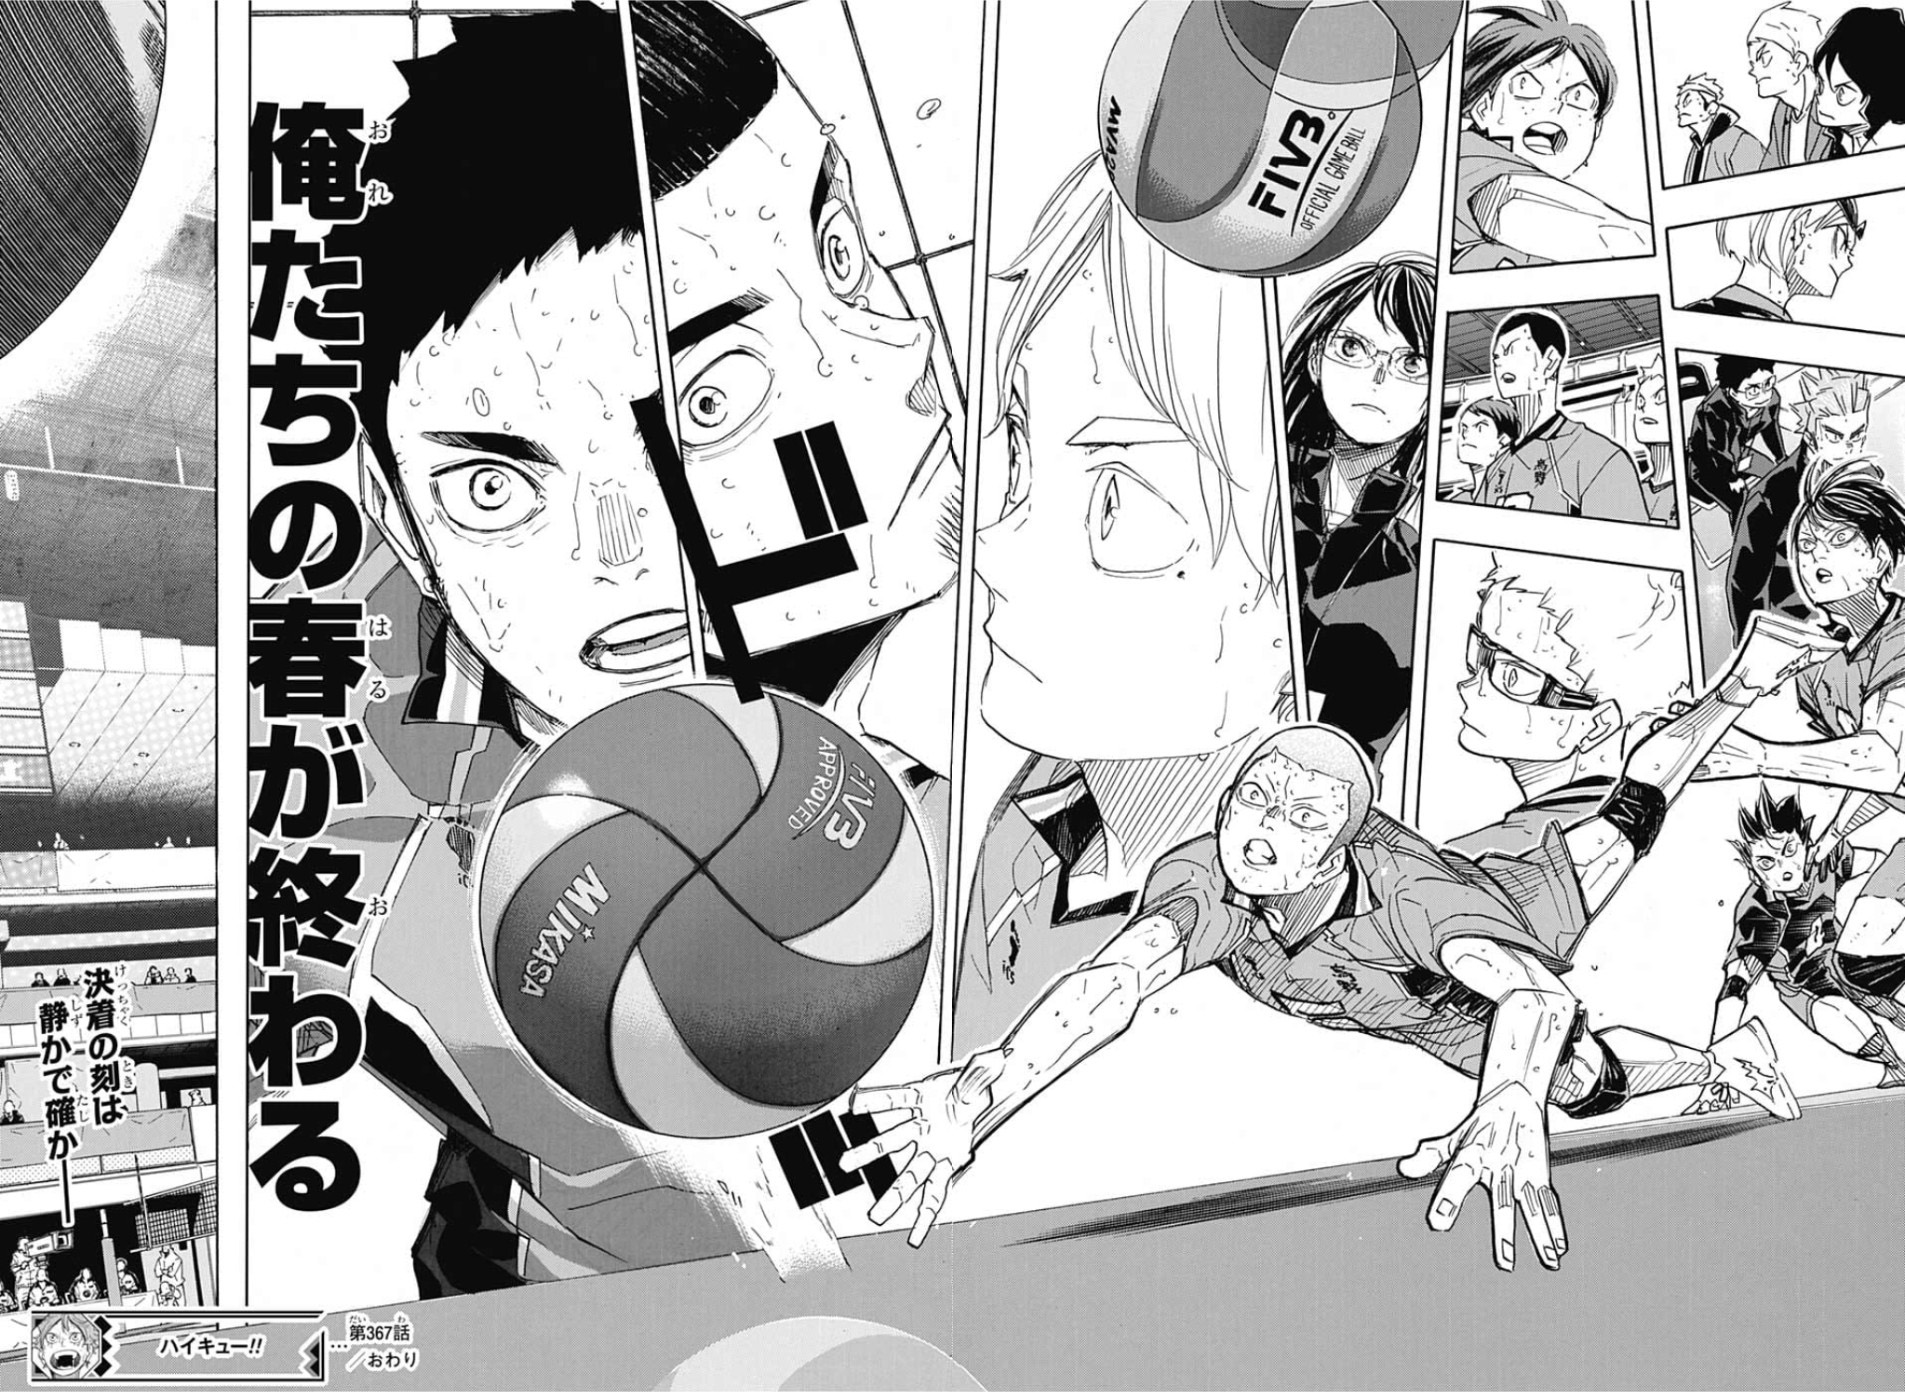 Haikyuu!! Season 5 could come with a fresh plot, not connected to